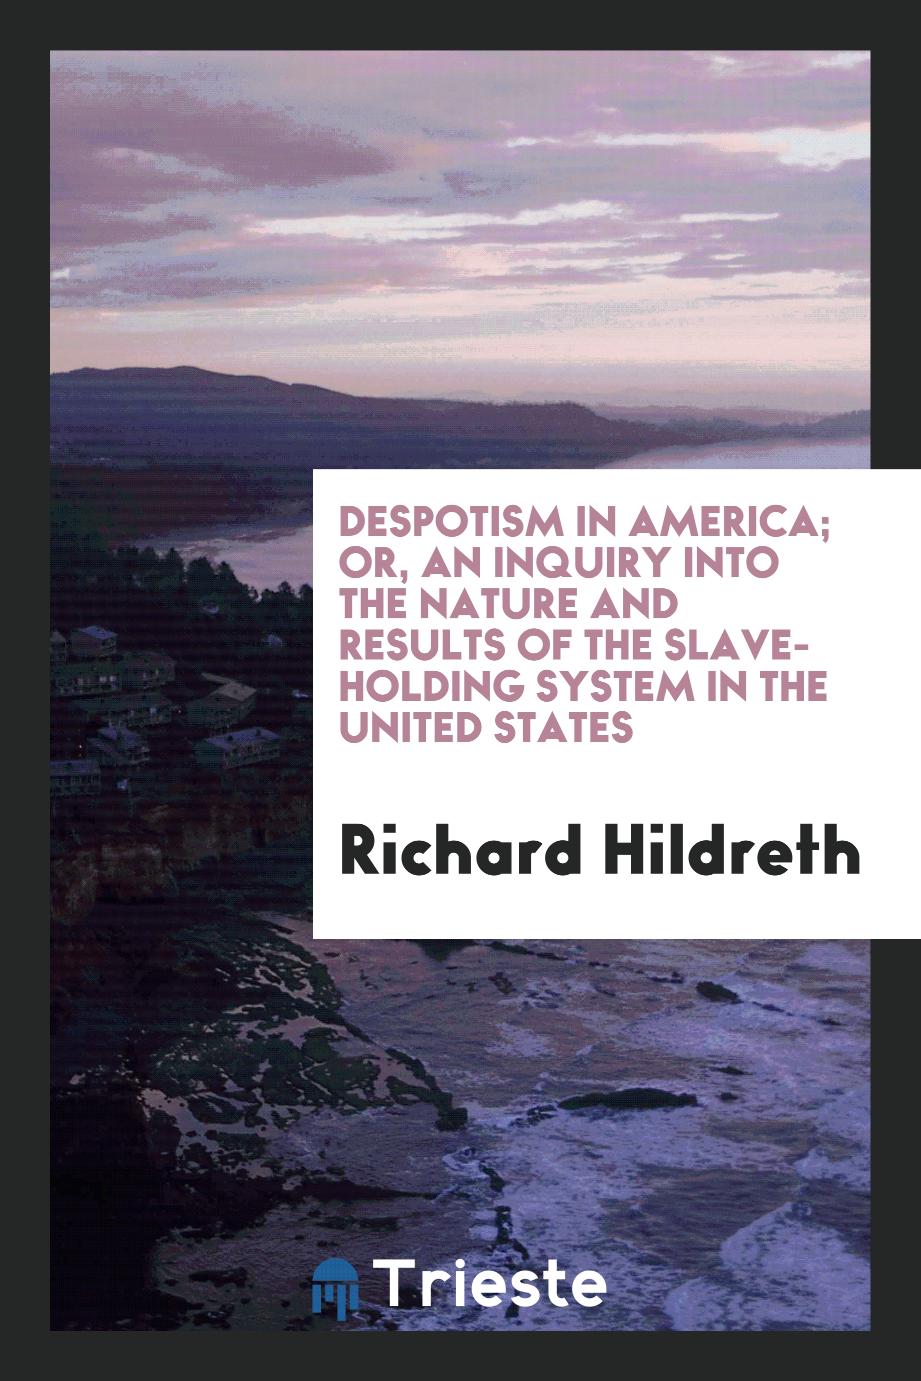 Despotism in America; or, An inquiry into the nature and results of the slave-holding system in the United States